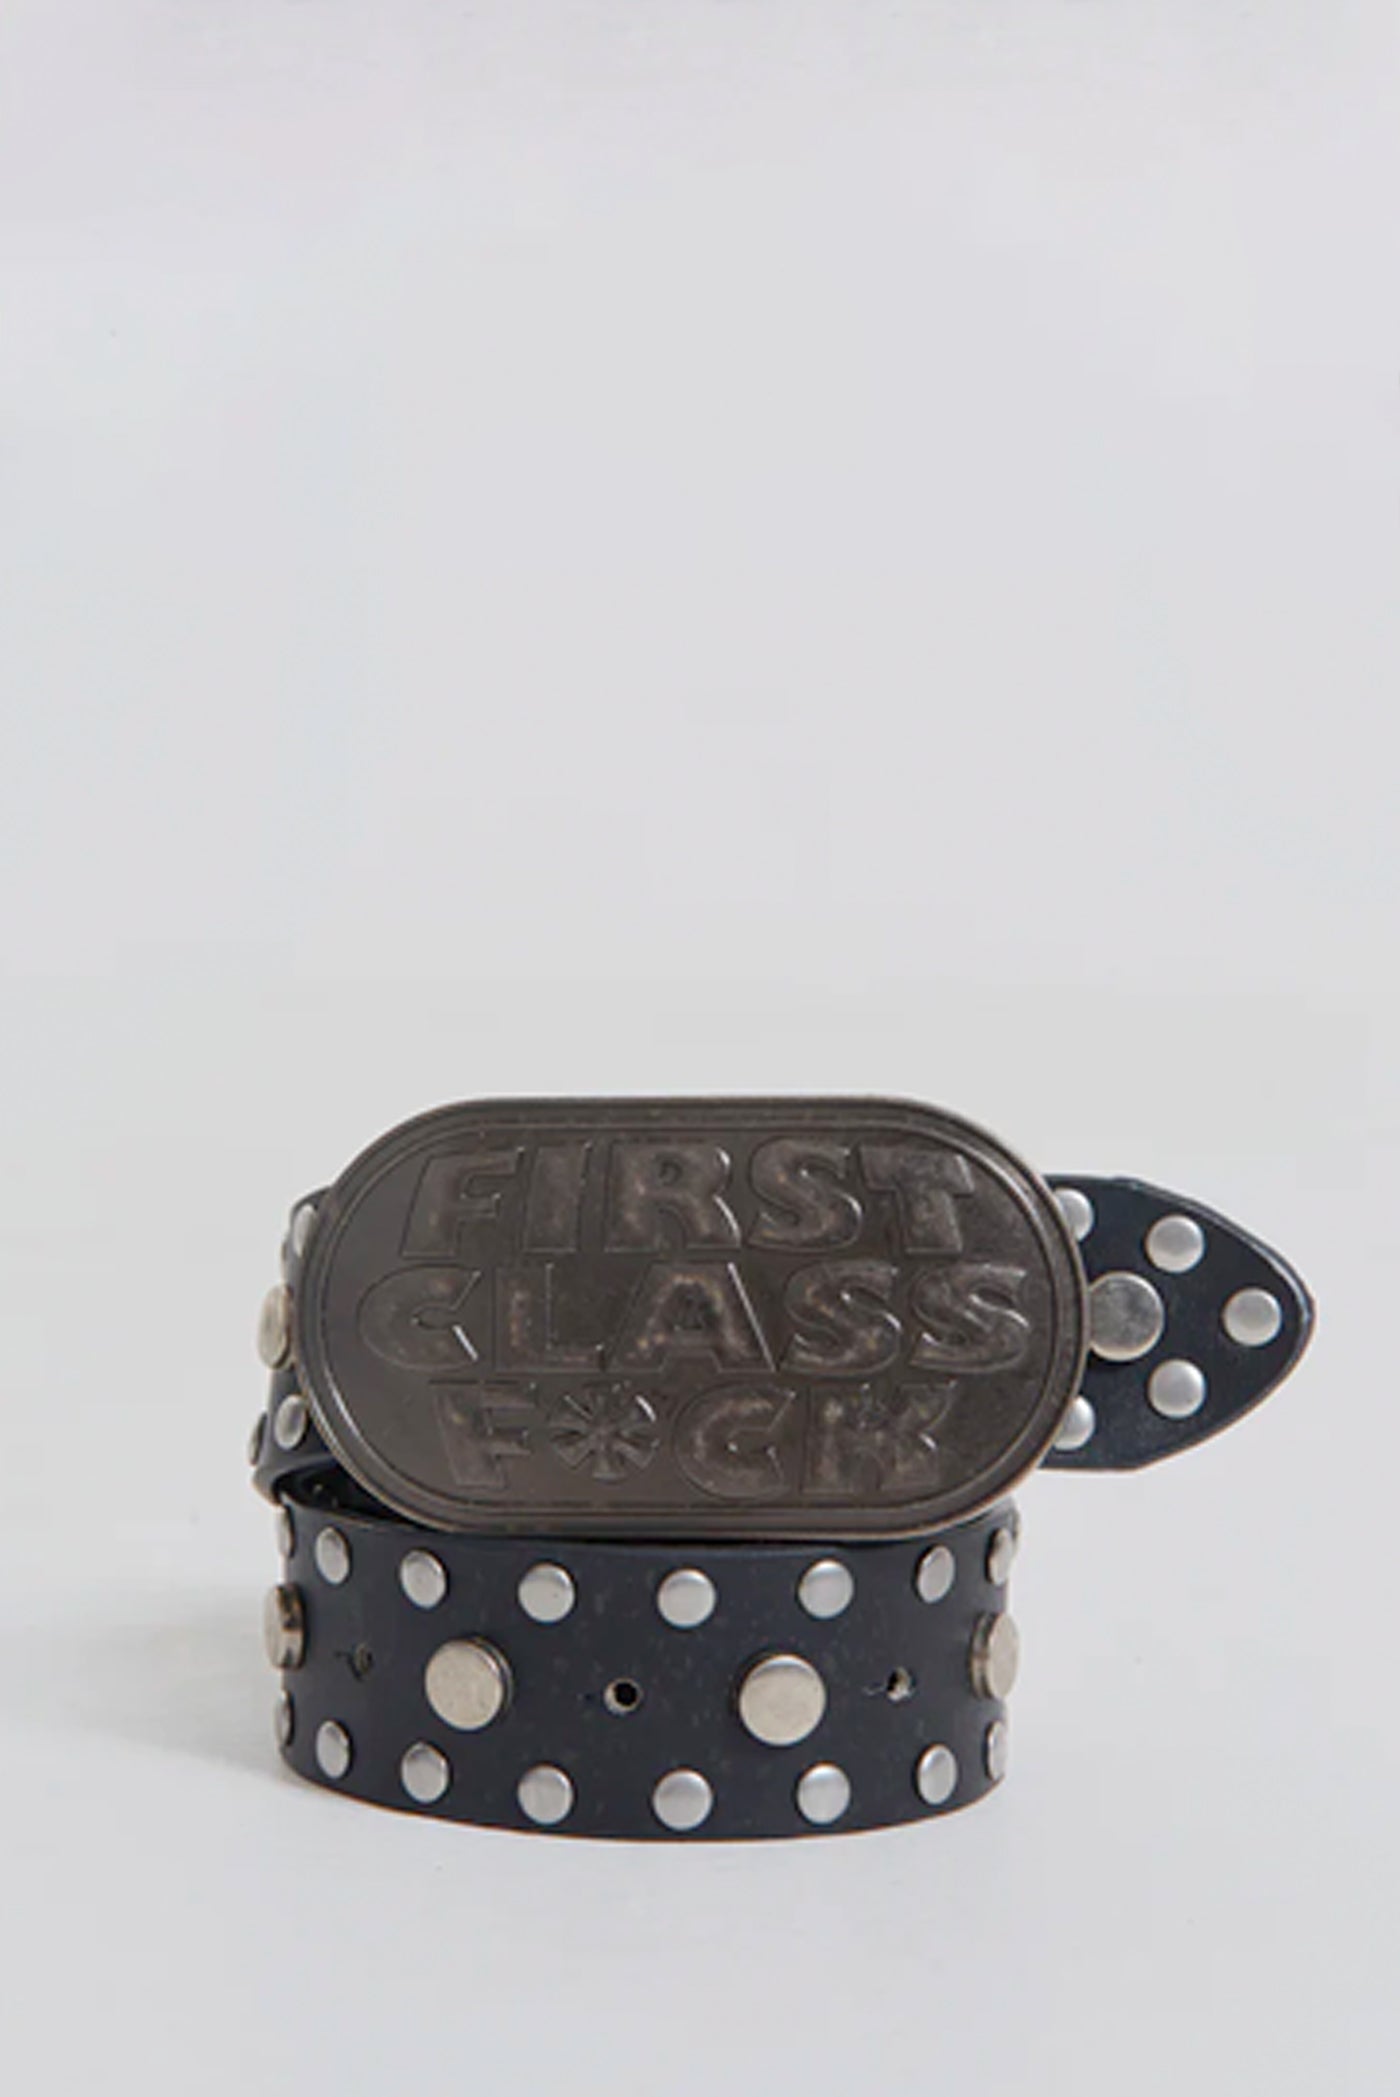 Add class to your outfit through Louis Vuitton belts - be it a